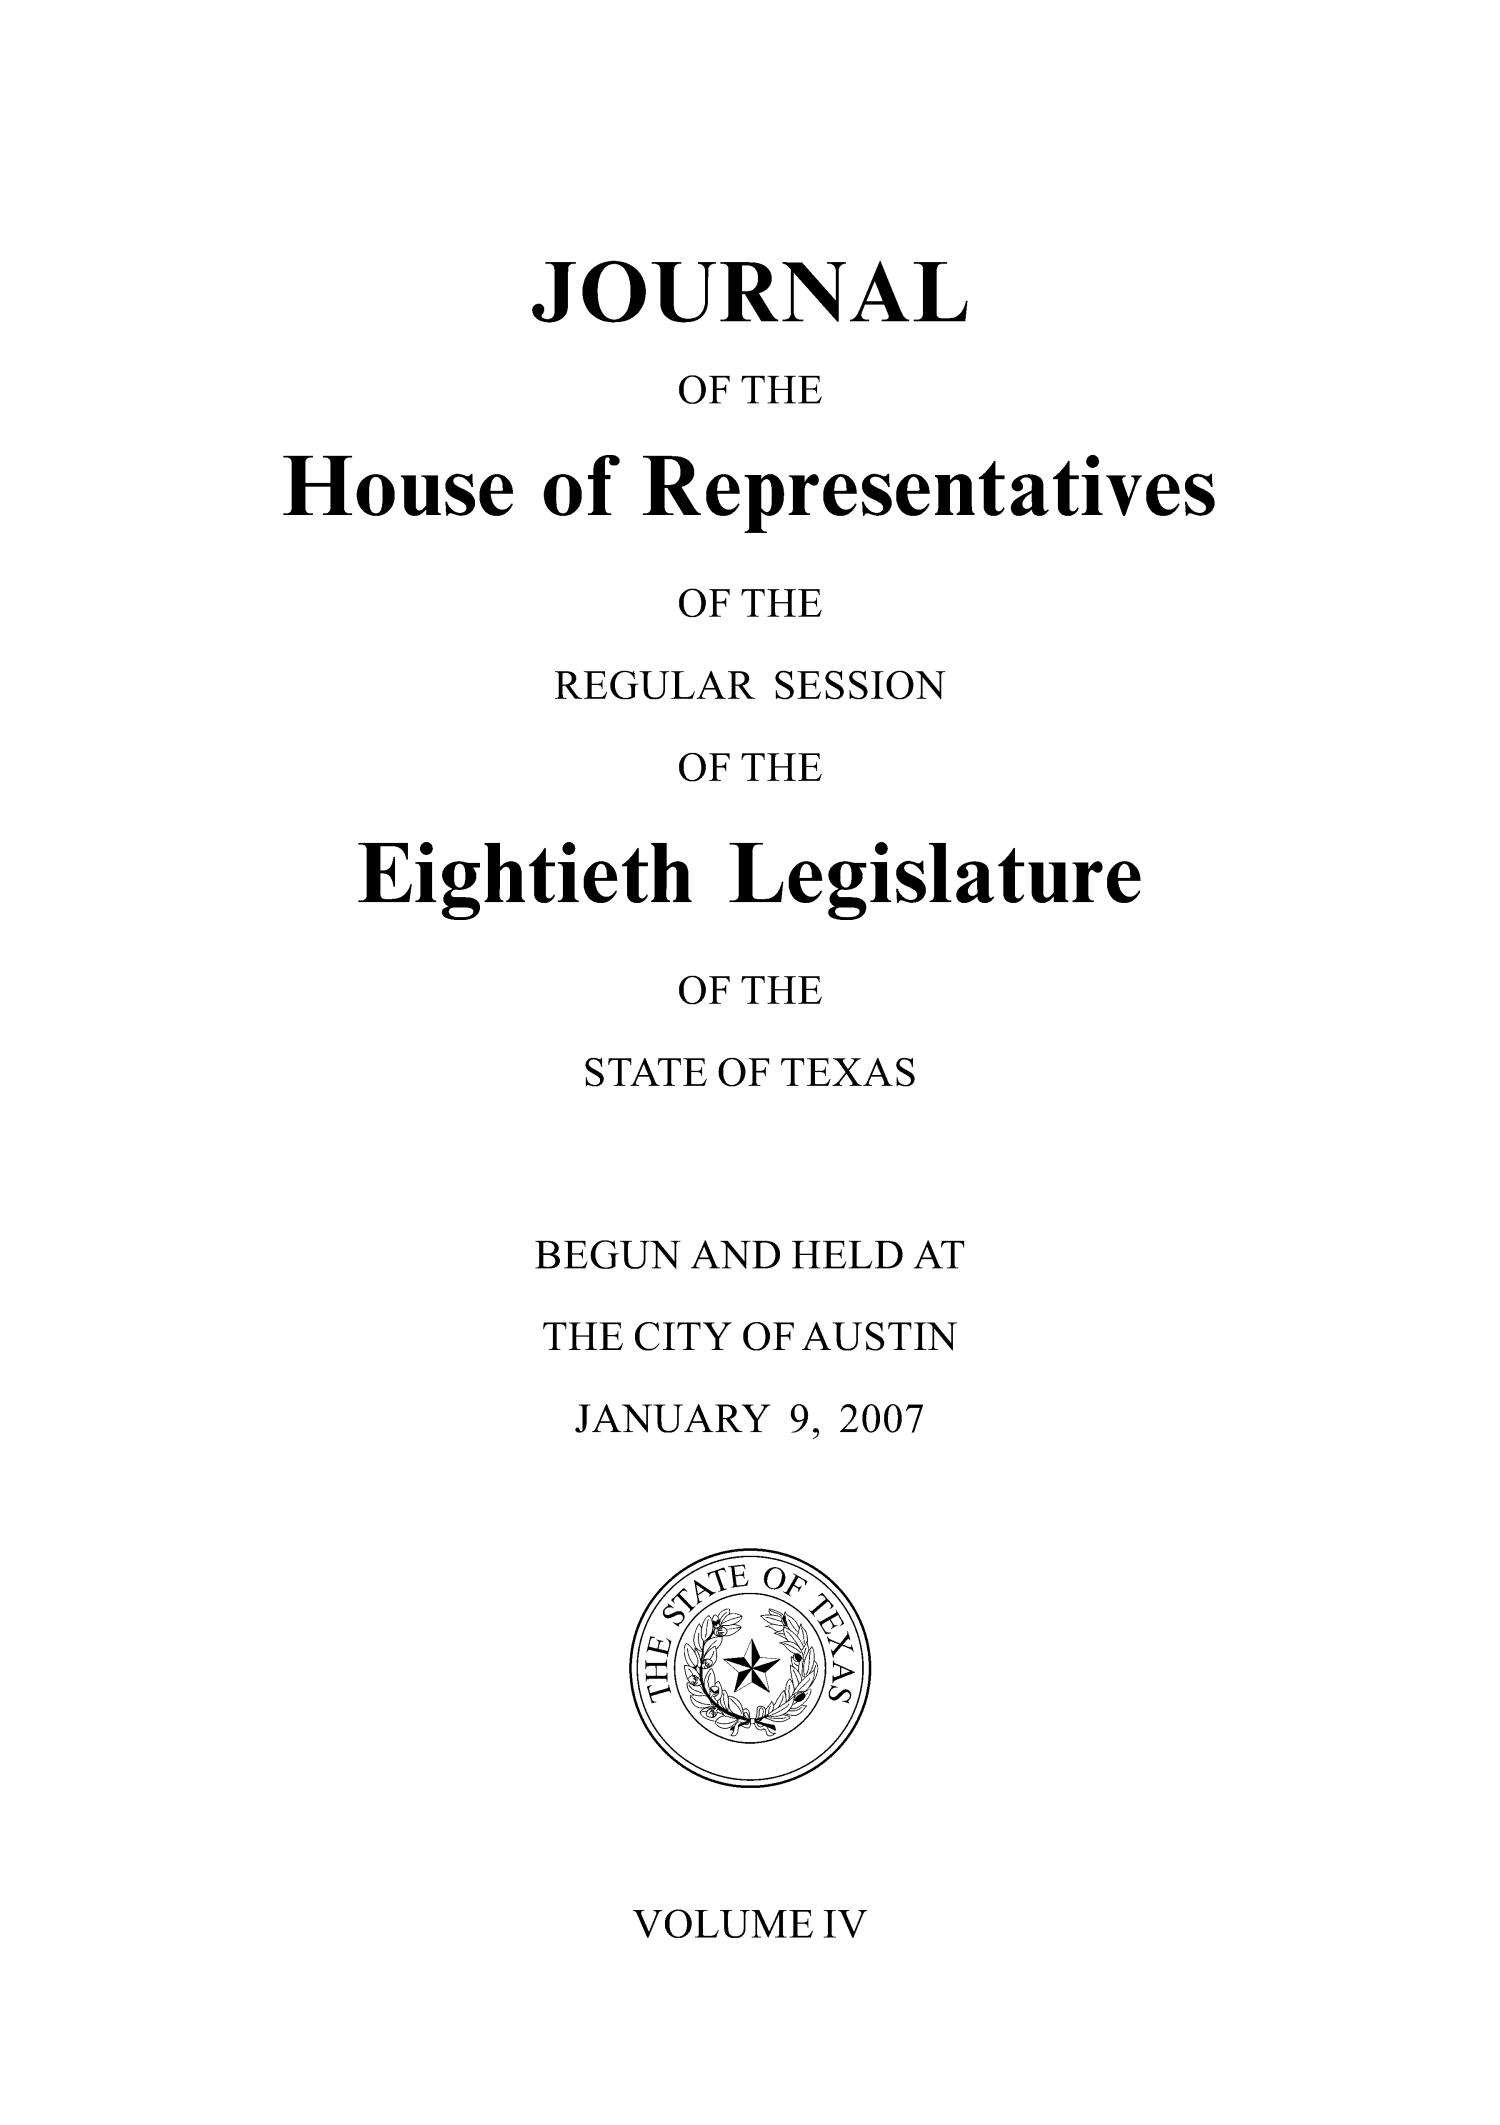 Journal of the House of Representatives of the Regular Session of the Eightieth Legislature of the State of Texas, Volume 4
                                                
                                                    Title Page
                                                